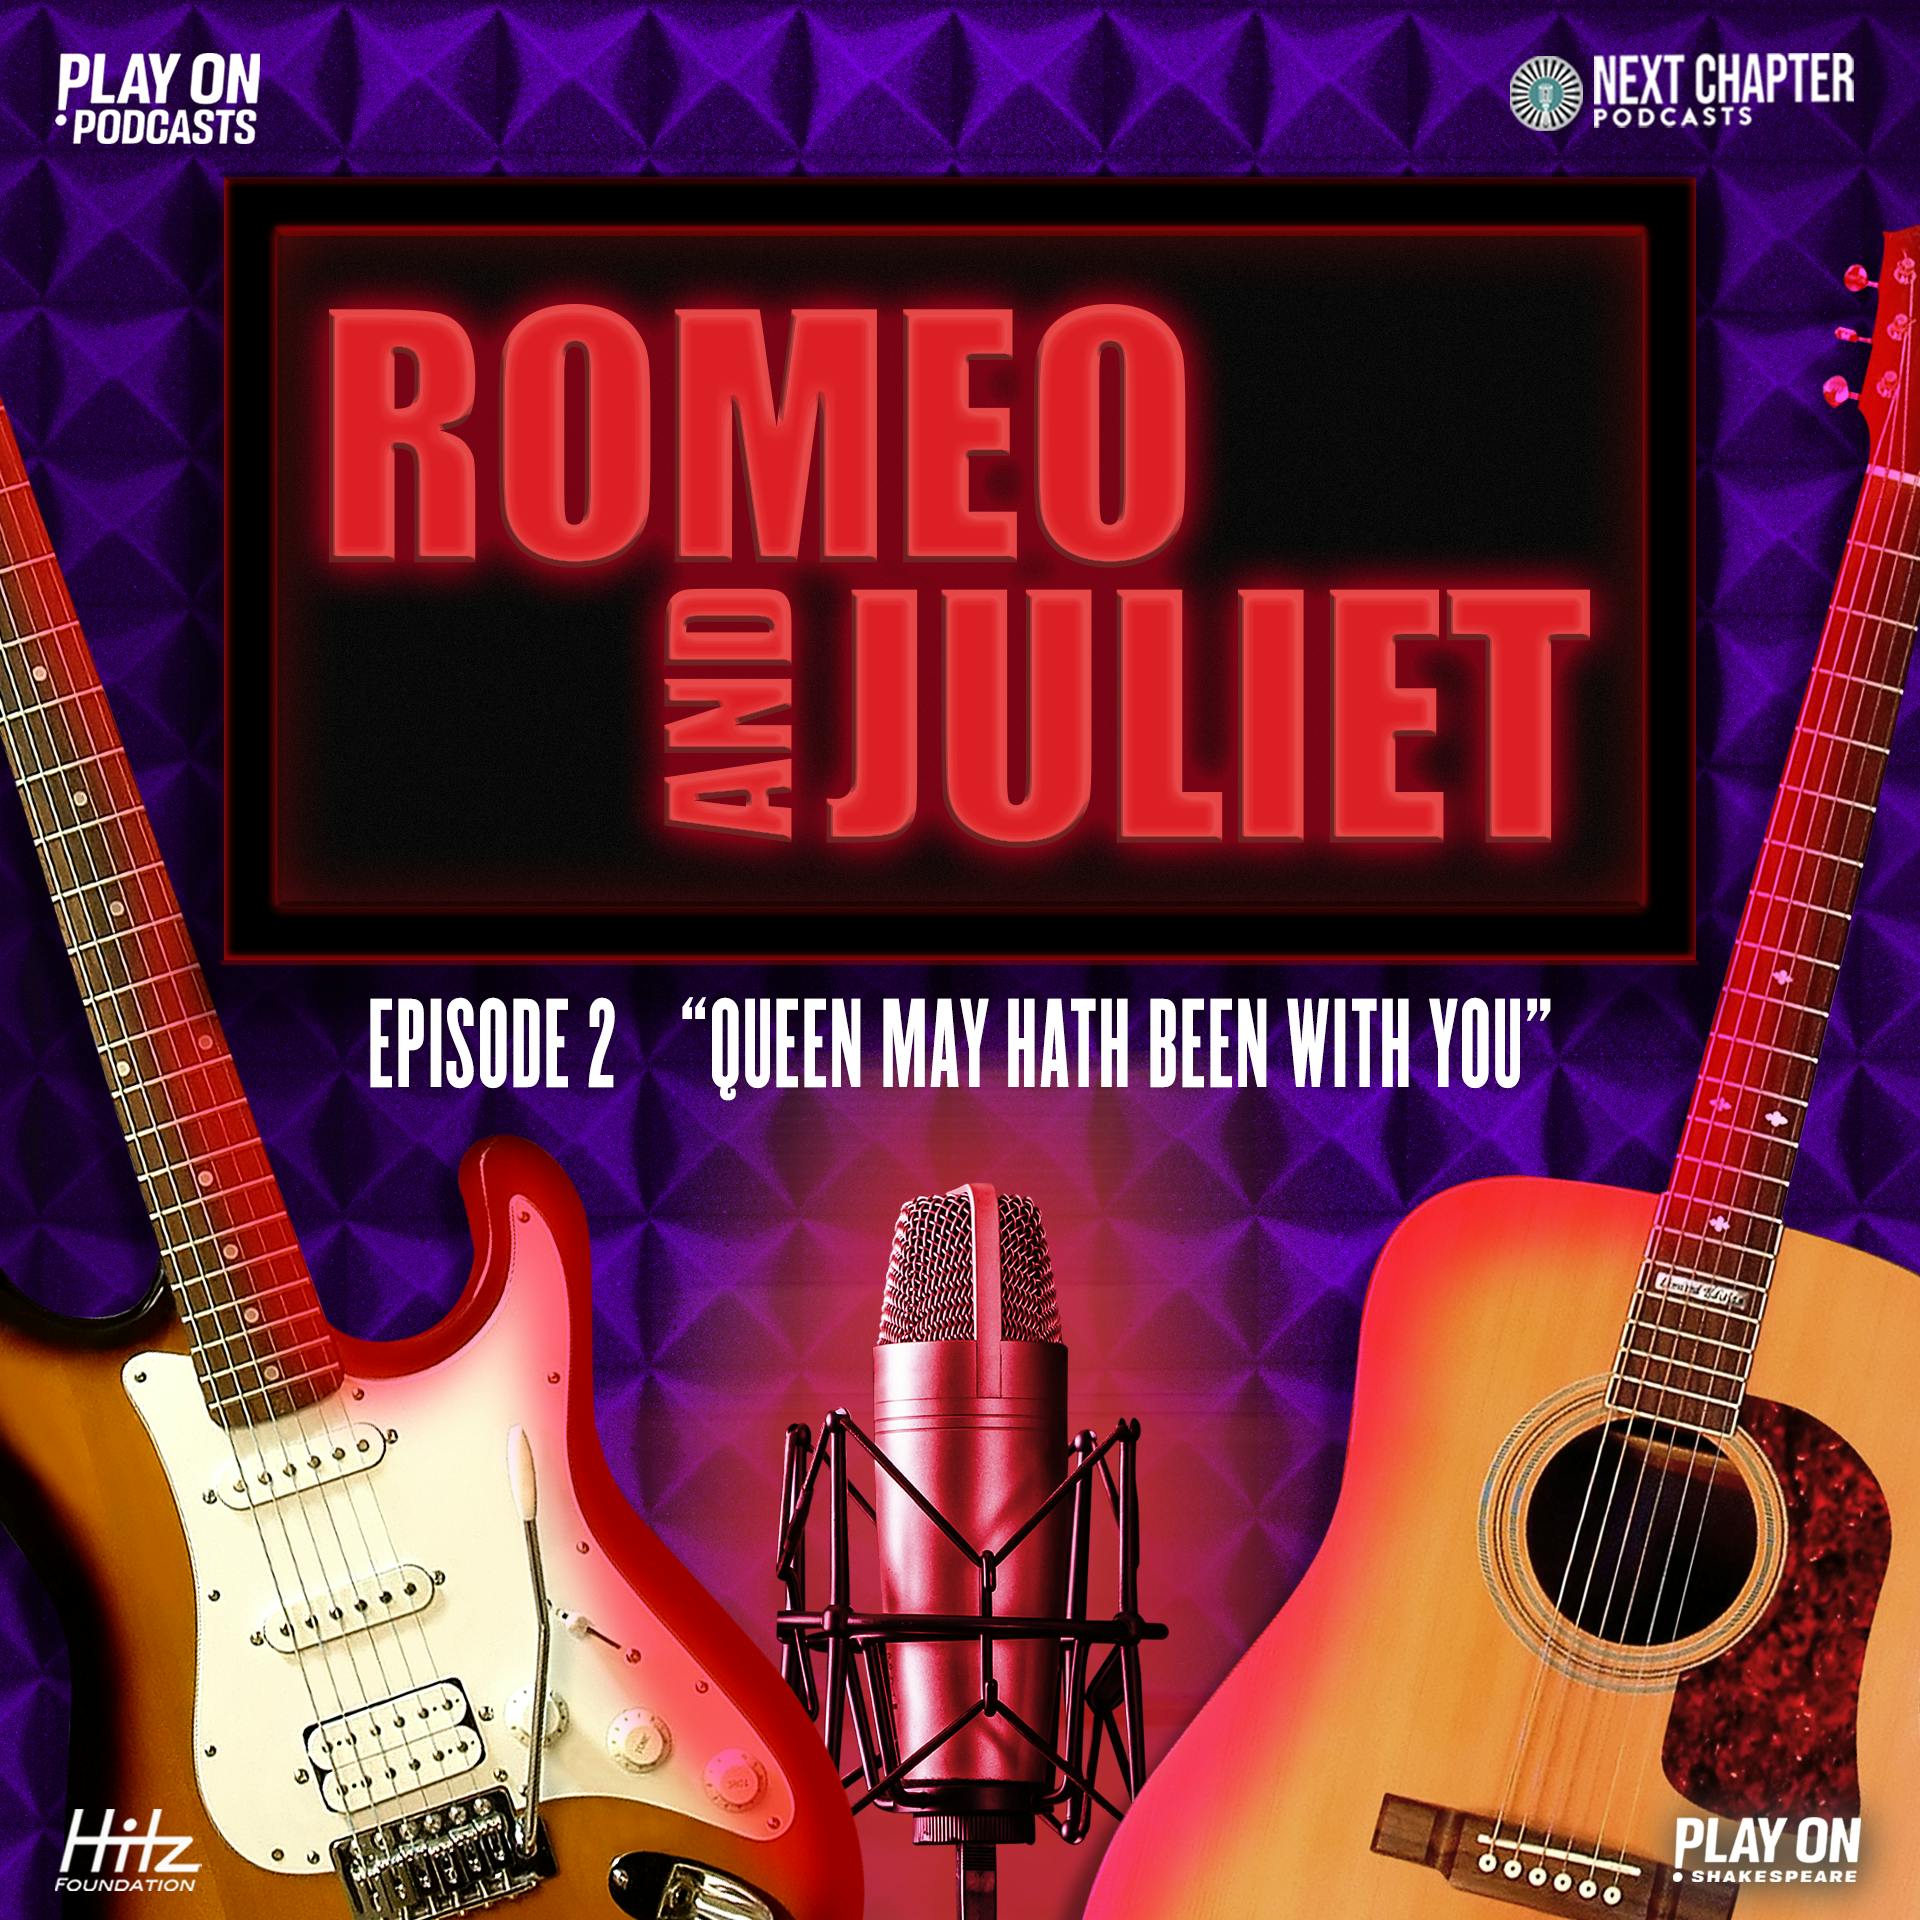 Romeo and Juliet - Episode 2 - Queen Mab Hath Been With You